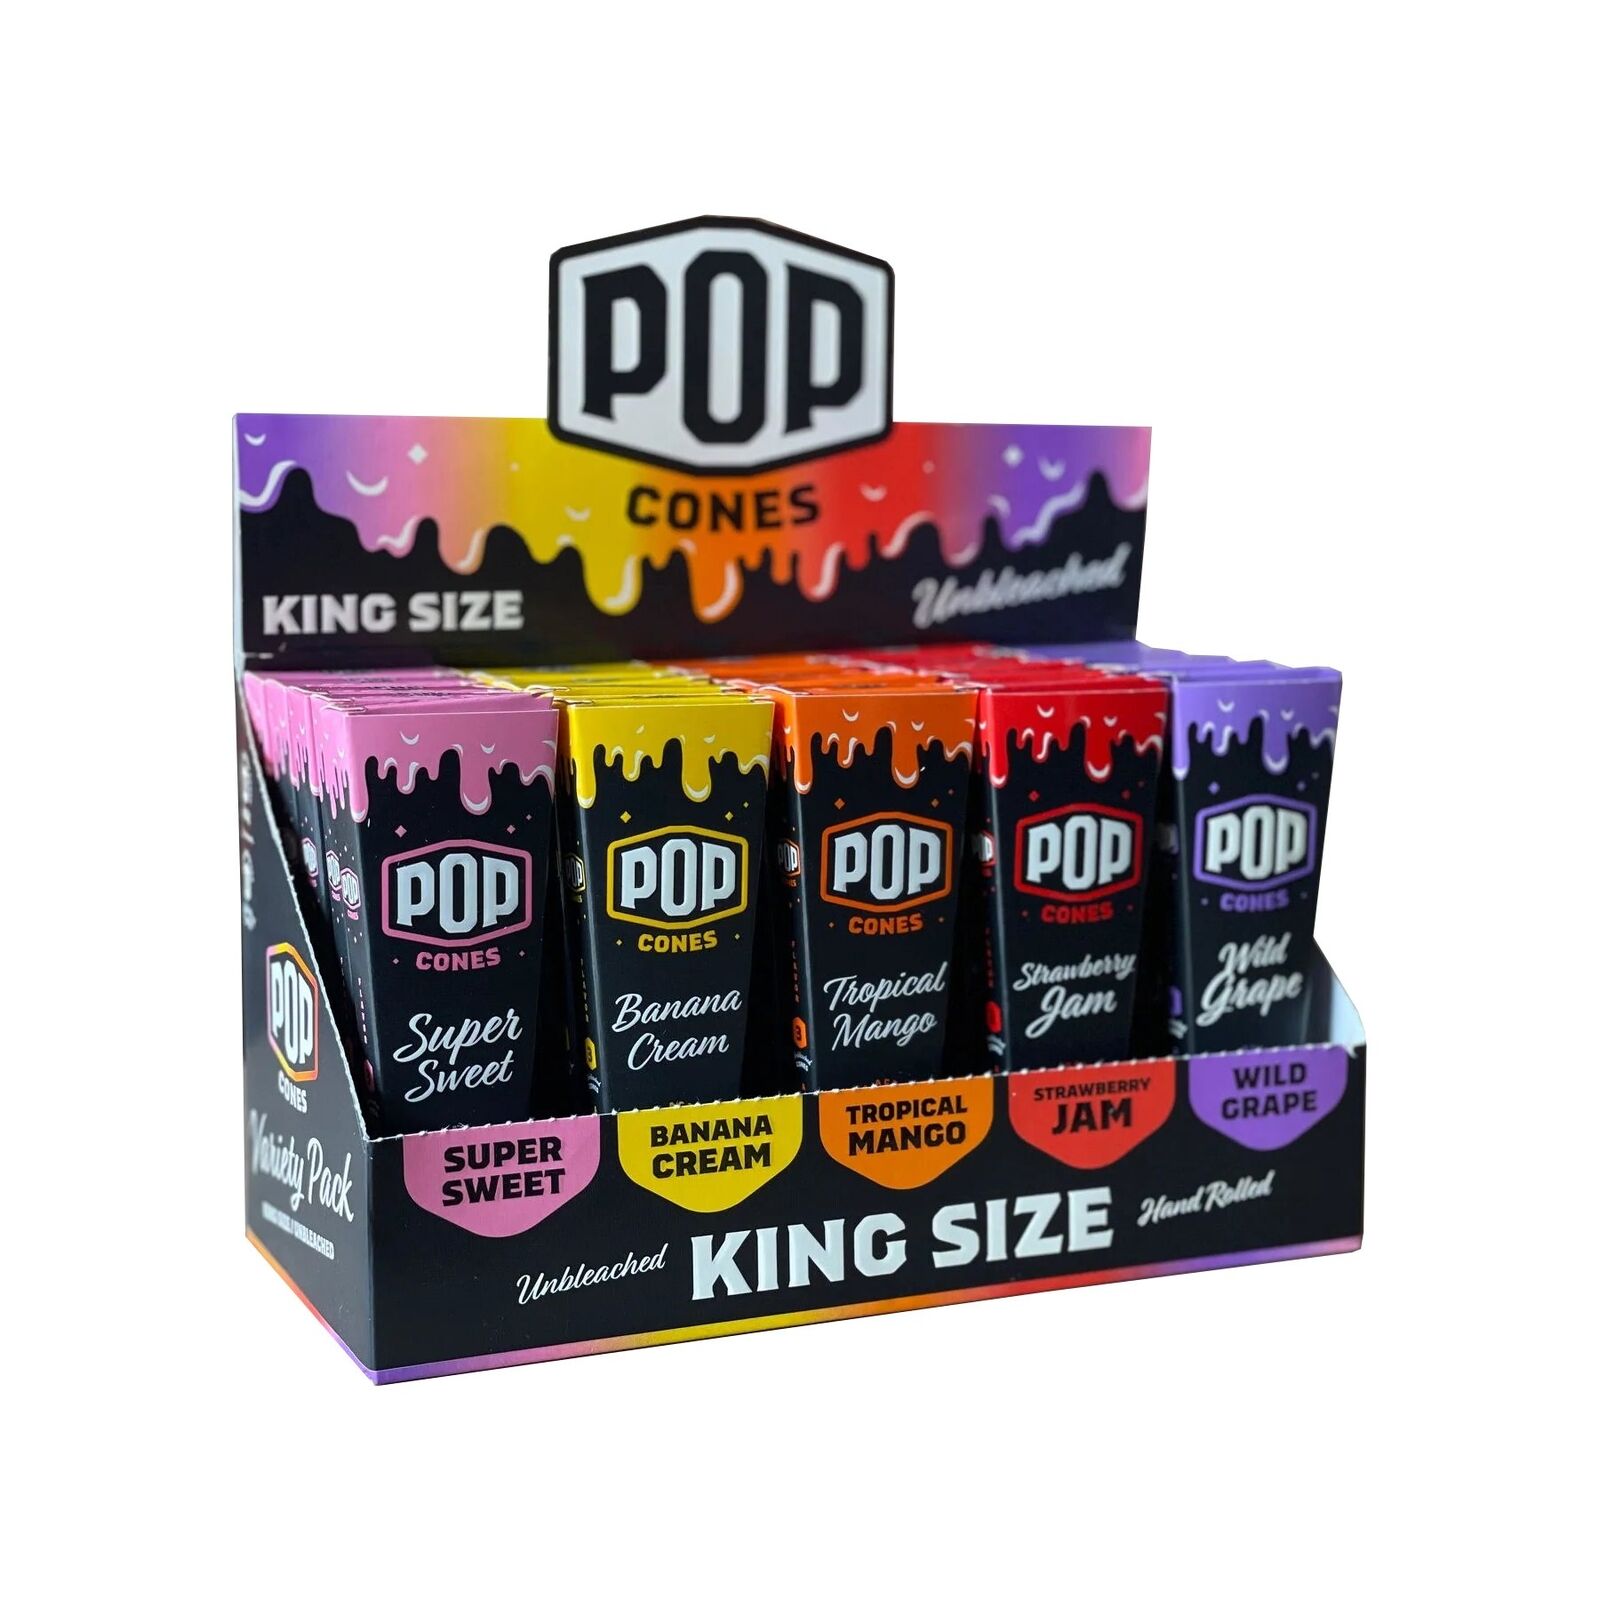 Box of 25 Pop Cones Variety Packs Unbleached - King Size